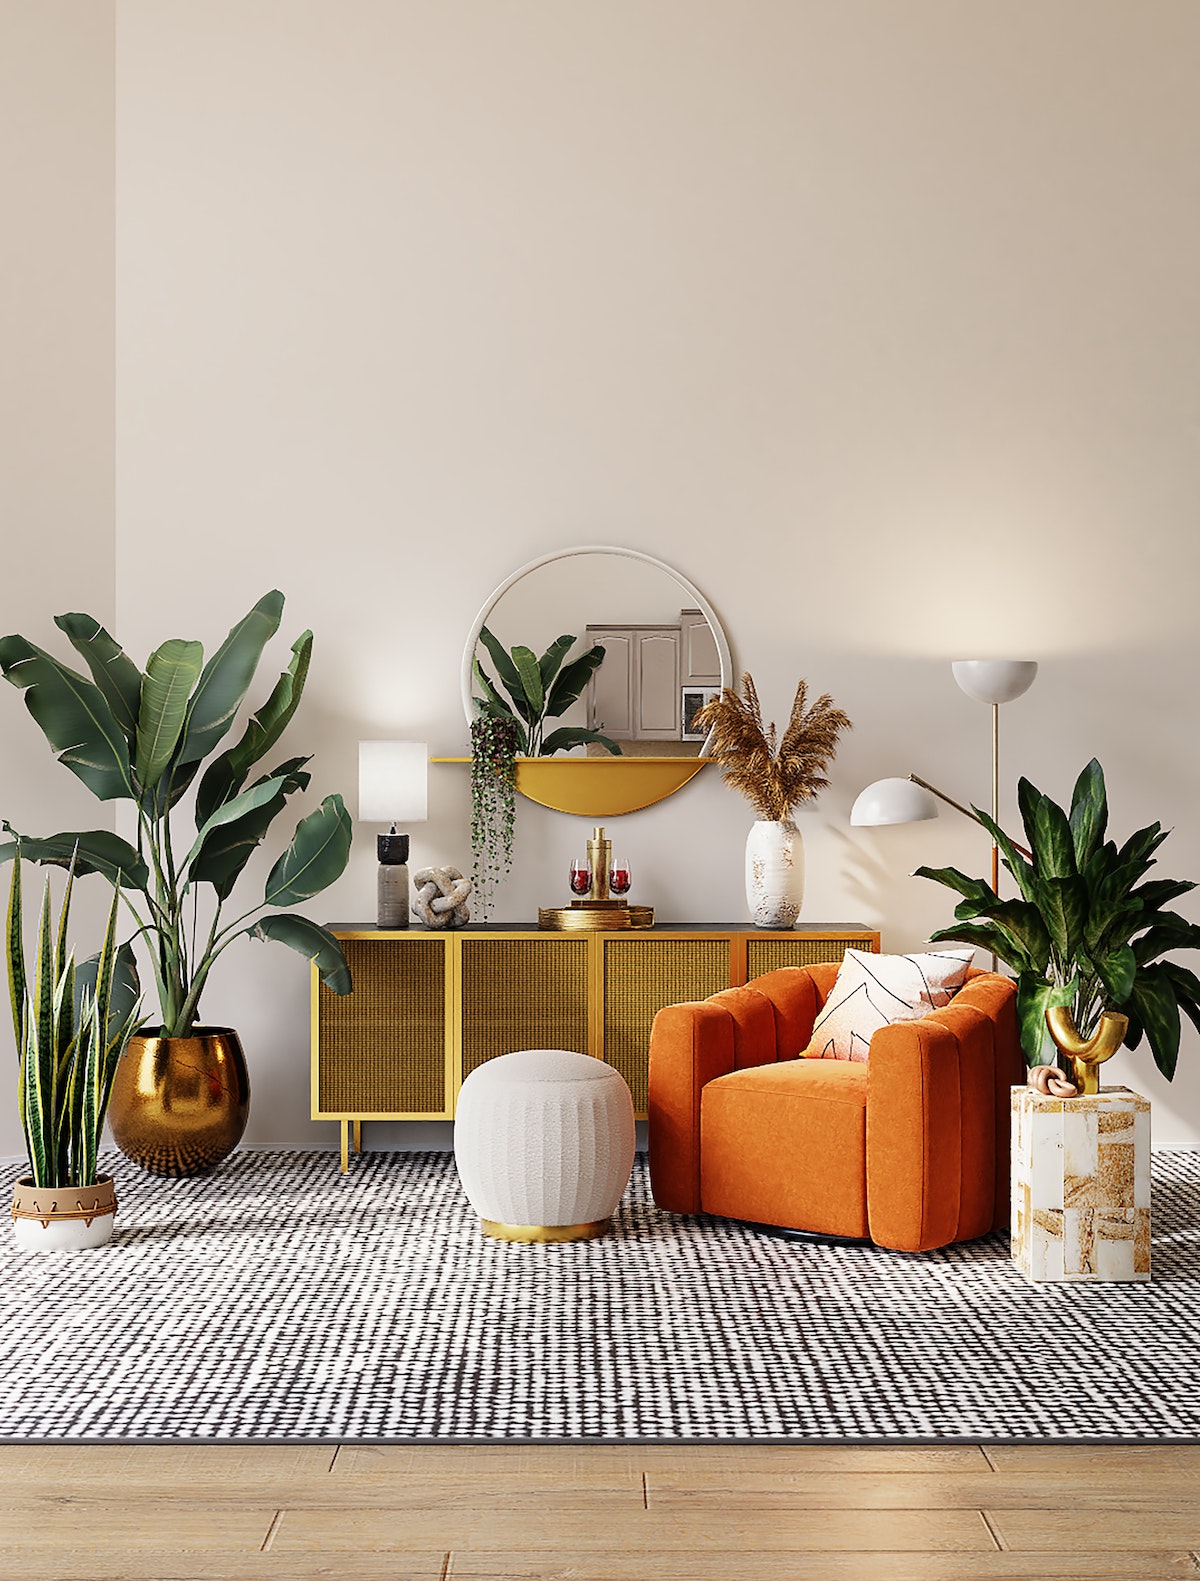 A boho interior design scheme, with orange armchair, textured rugs and plants 